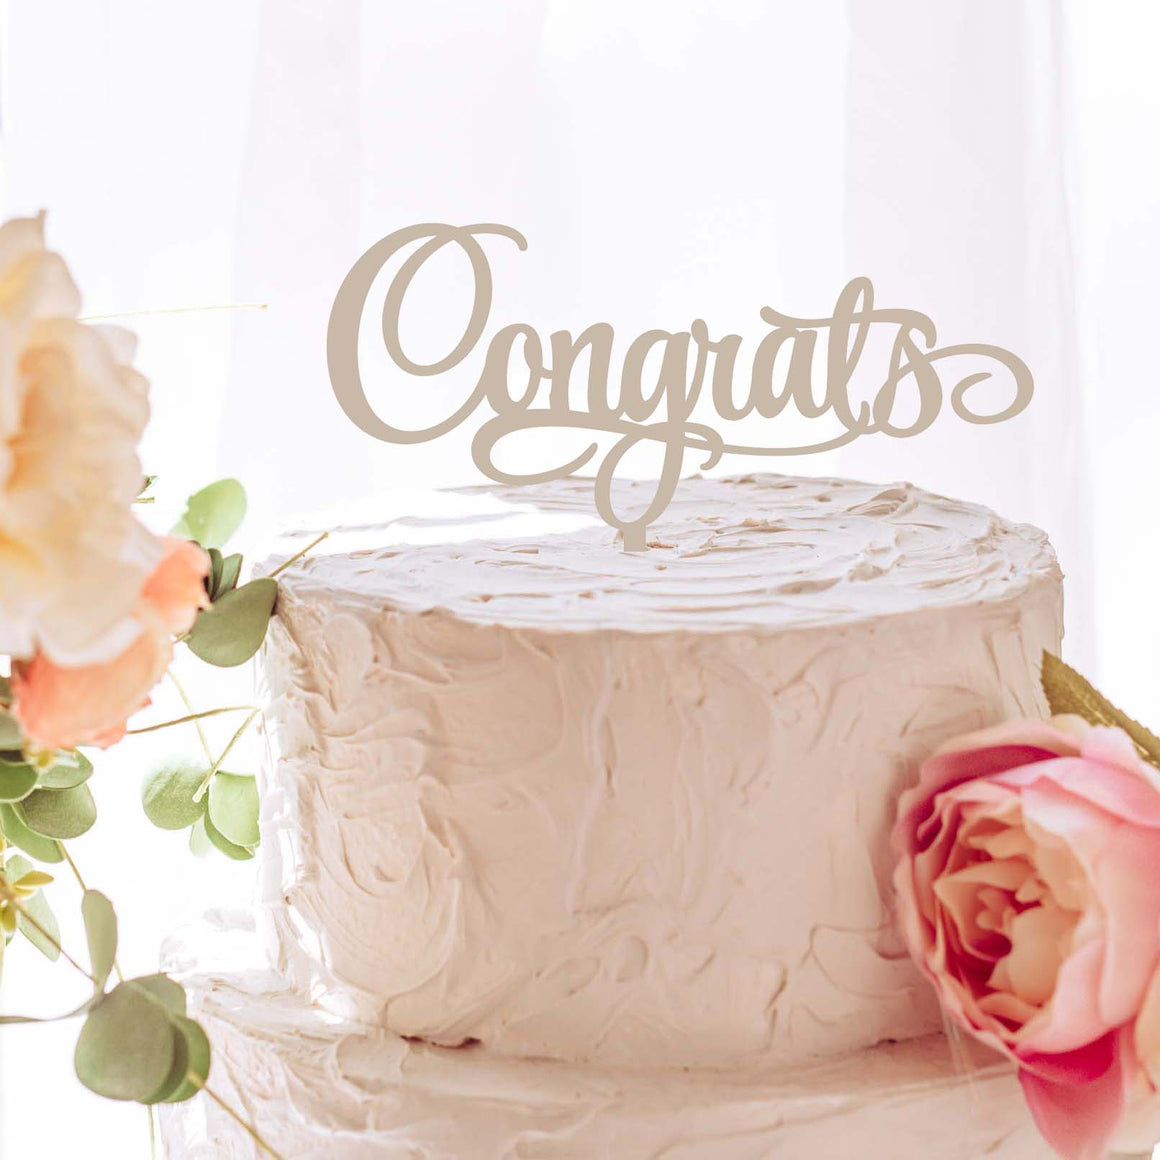 Congrats script cake topper on a white cake with florals